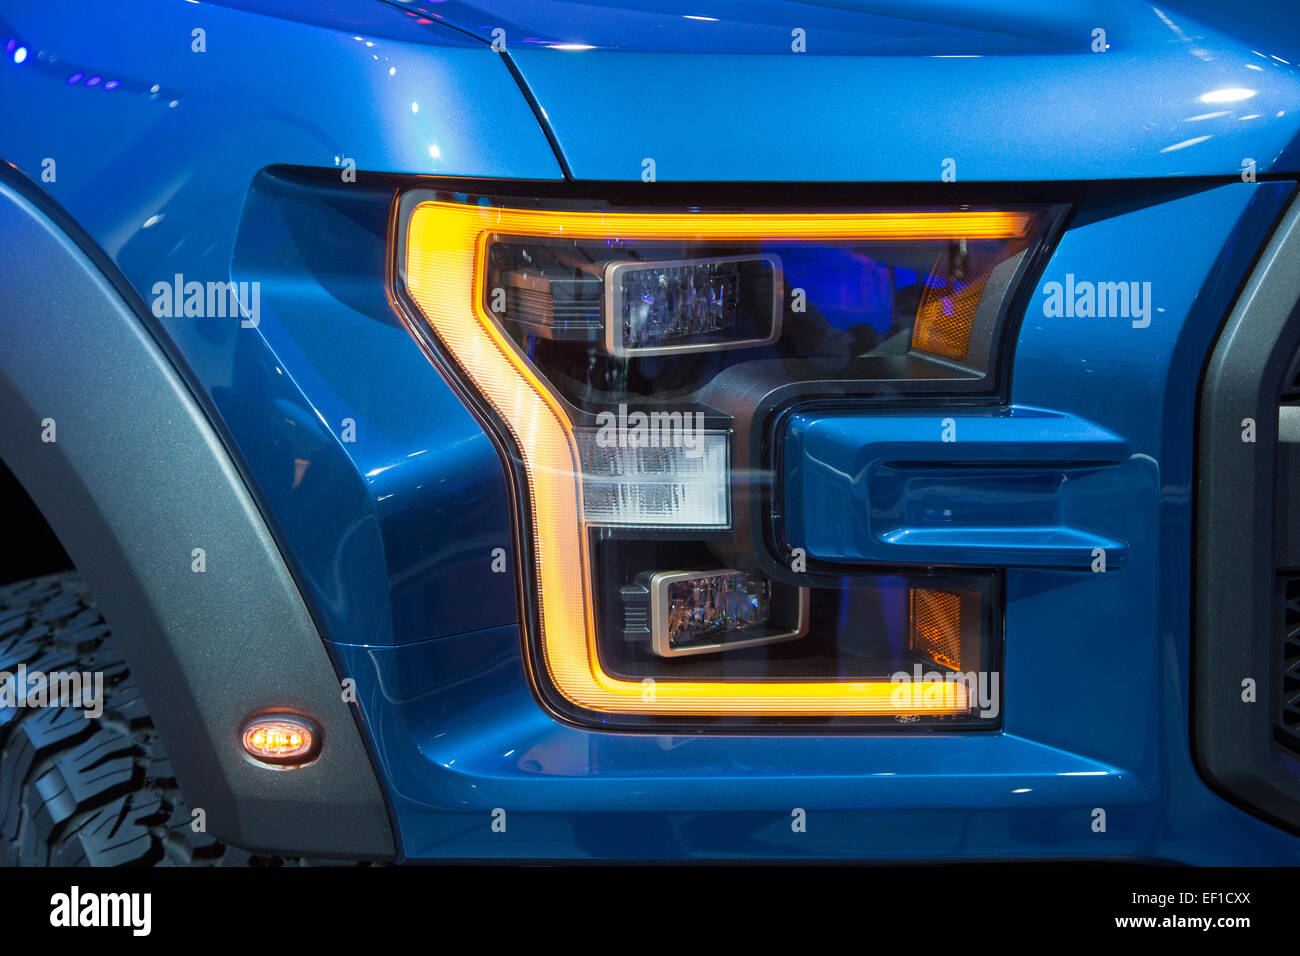 Detroit, Michigan - Headlight of the Ford F-150 Raptor aluminum body pickup truck on display at the Detroit auto show. Stock Photo